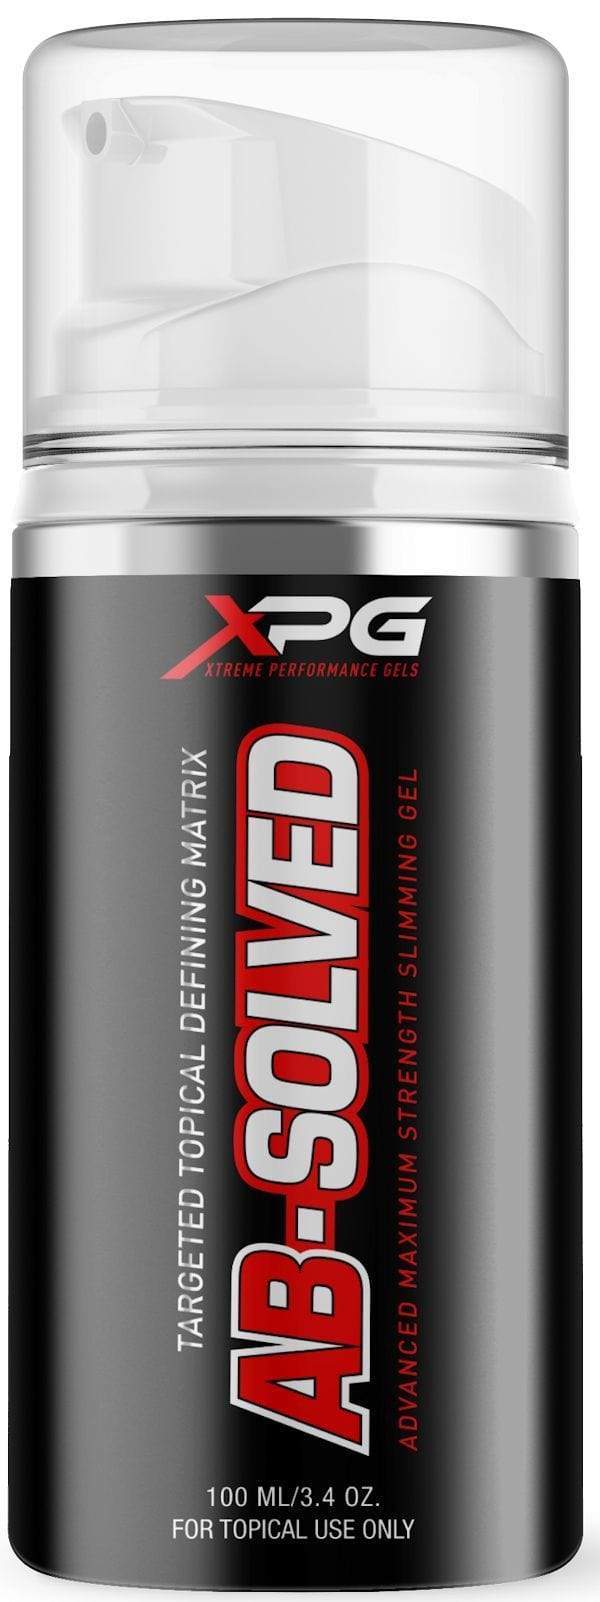 Xtreme Performance Gels XPG AB-Solved Targeted Topical Defining Lowcostvitamin.com